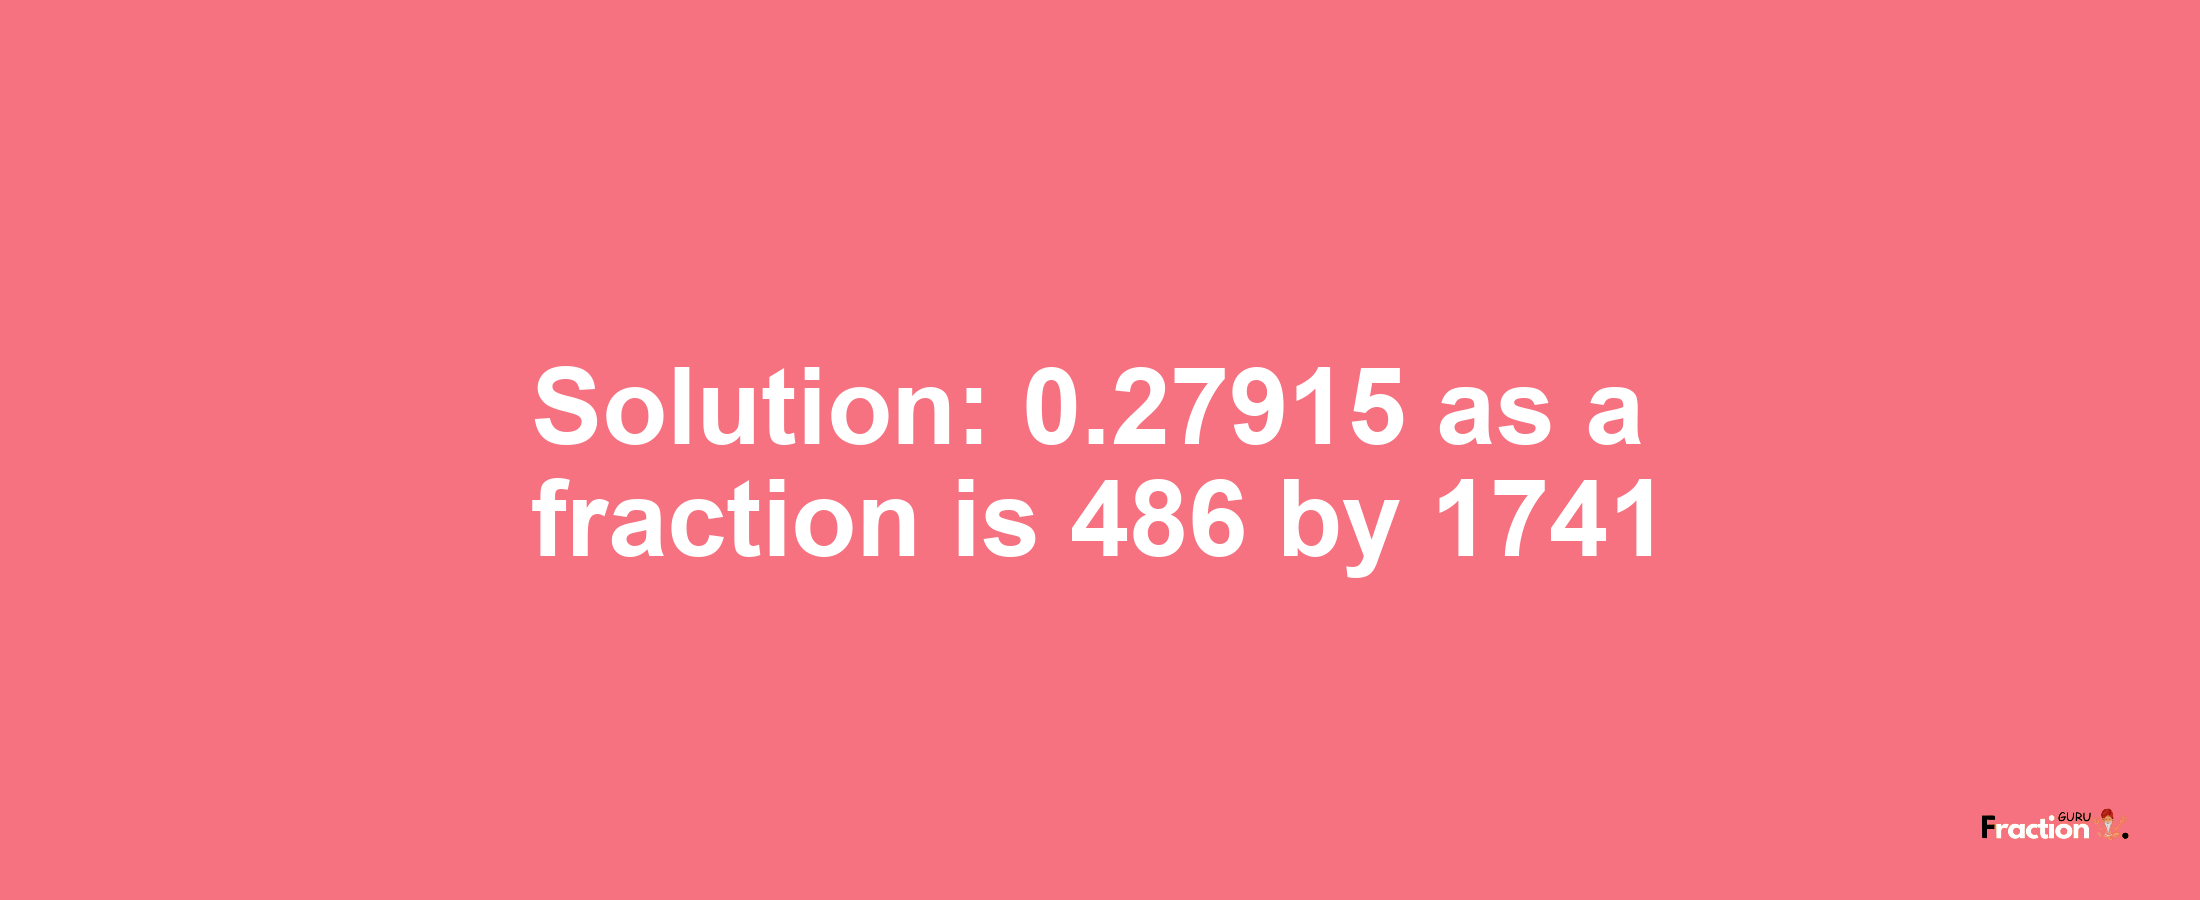 Solution:0.27915 as a fraction is 486/1741